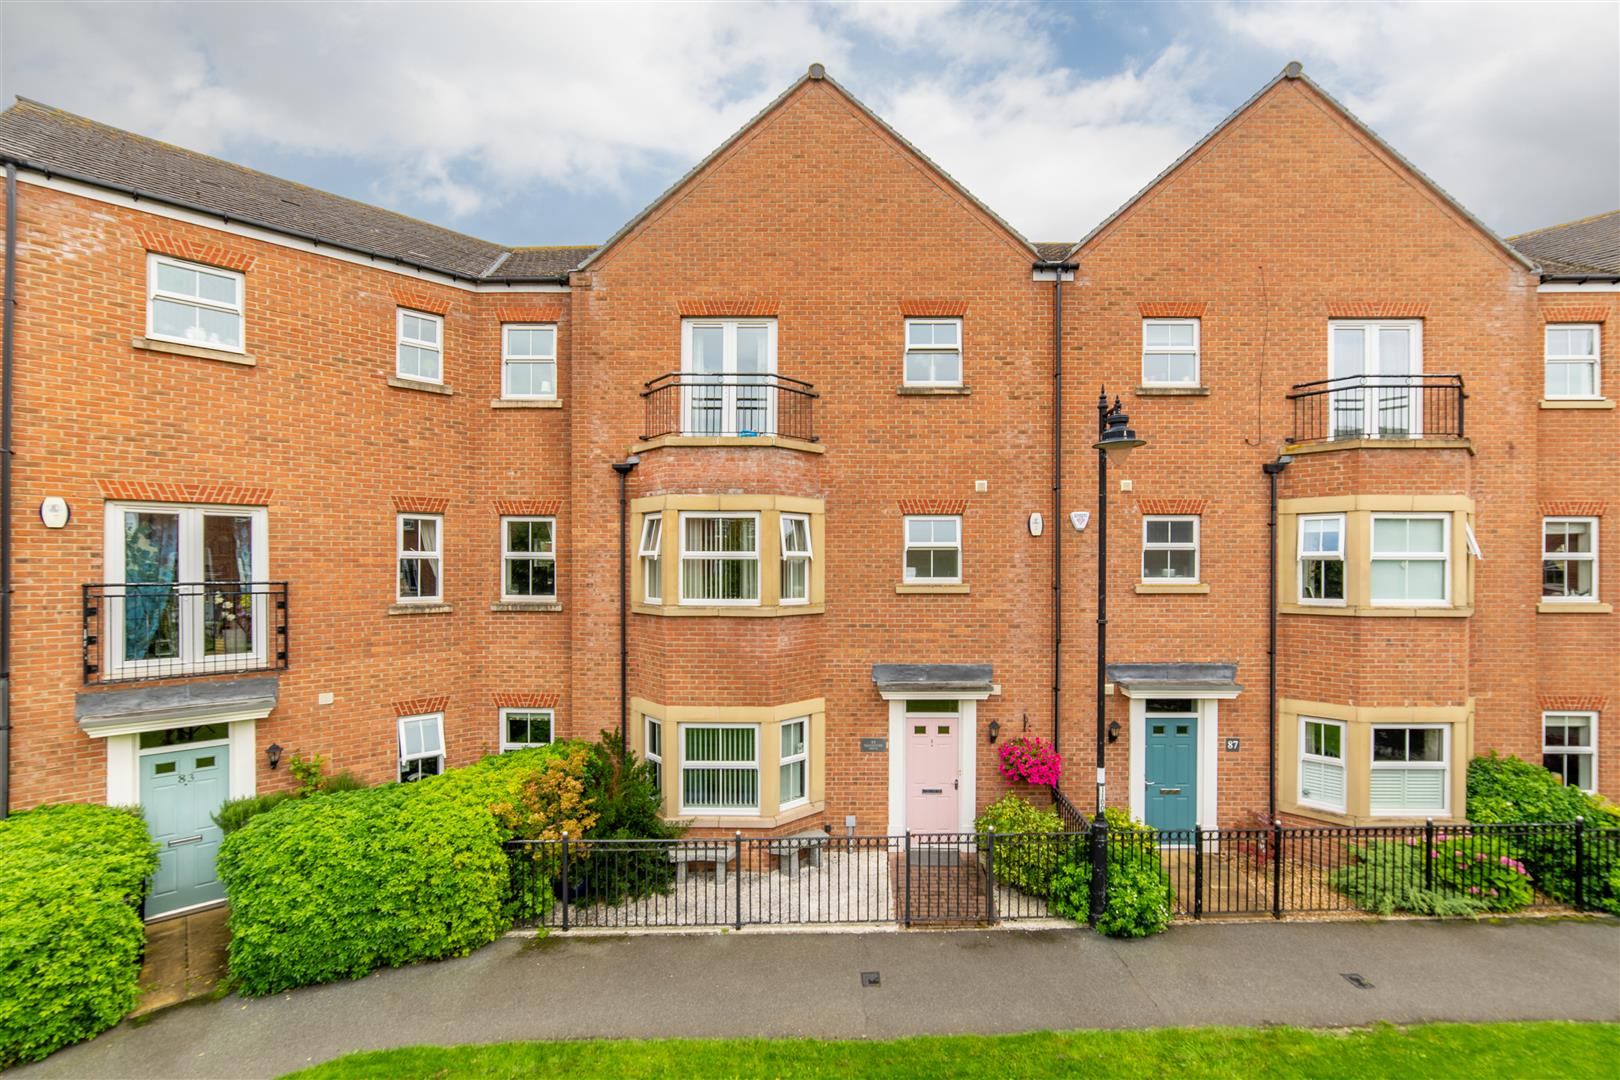 4 bed town house for sale in Featherstone Grove, Great Park, NE3 